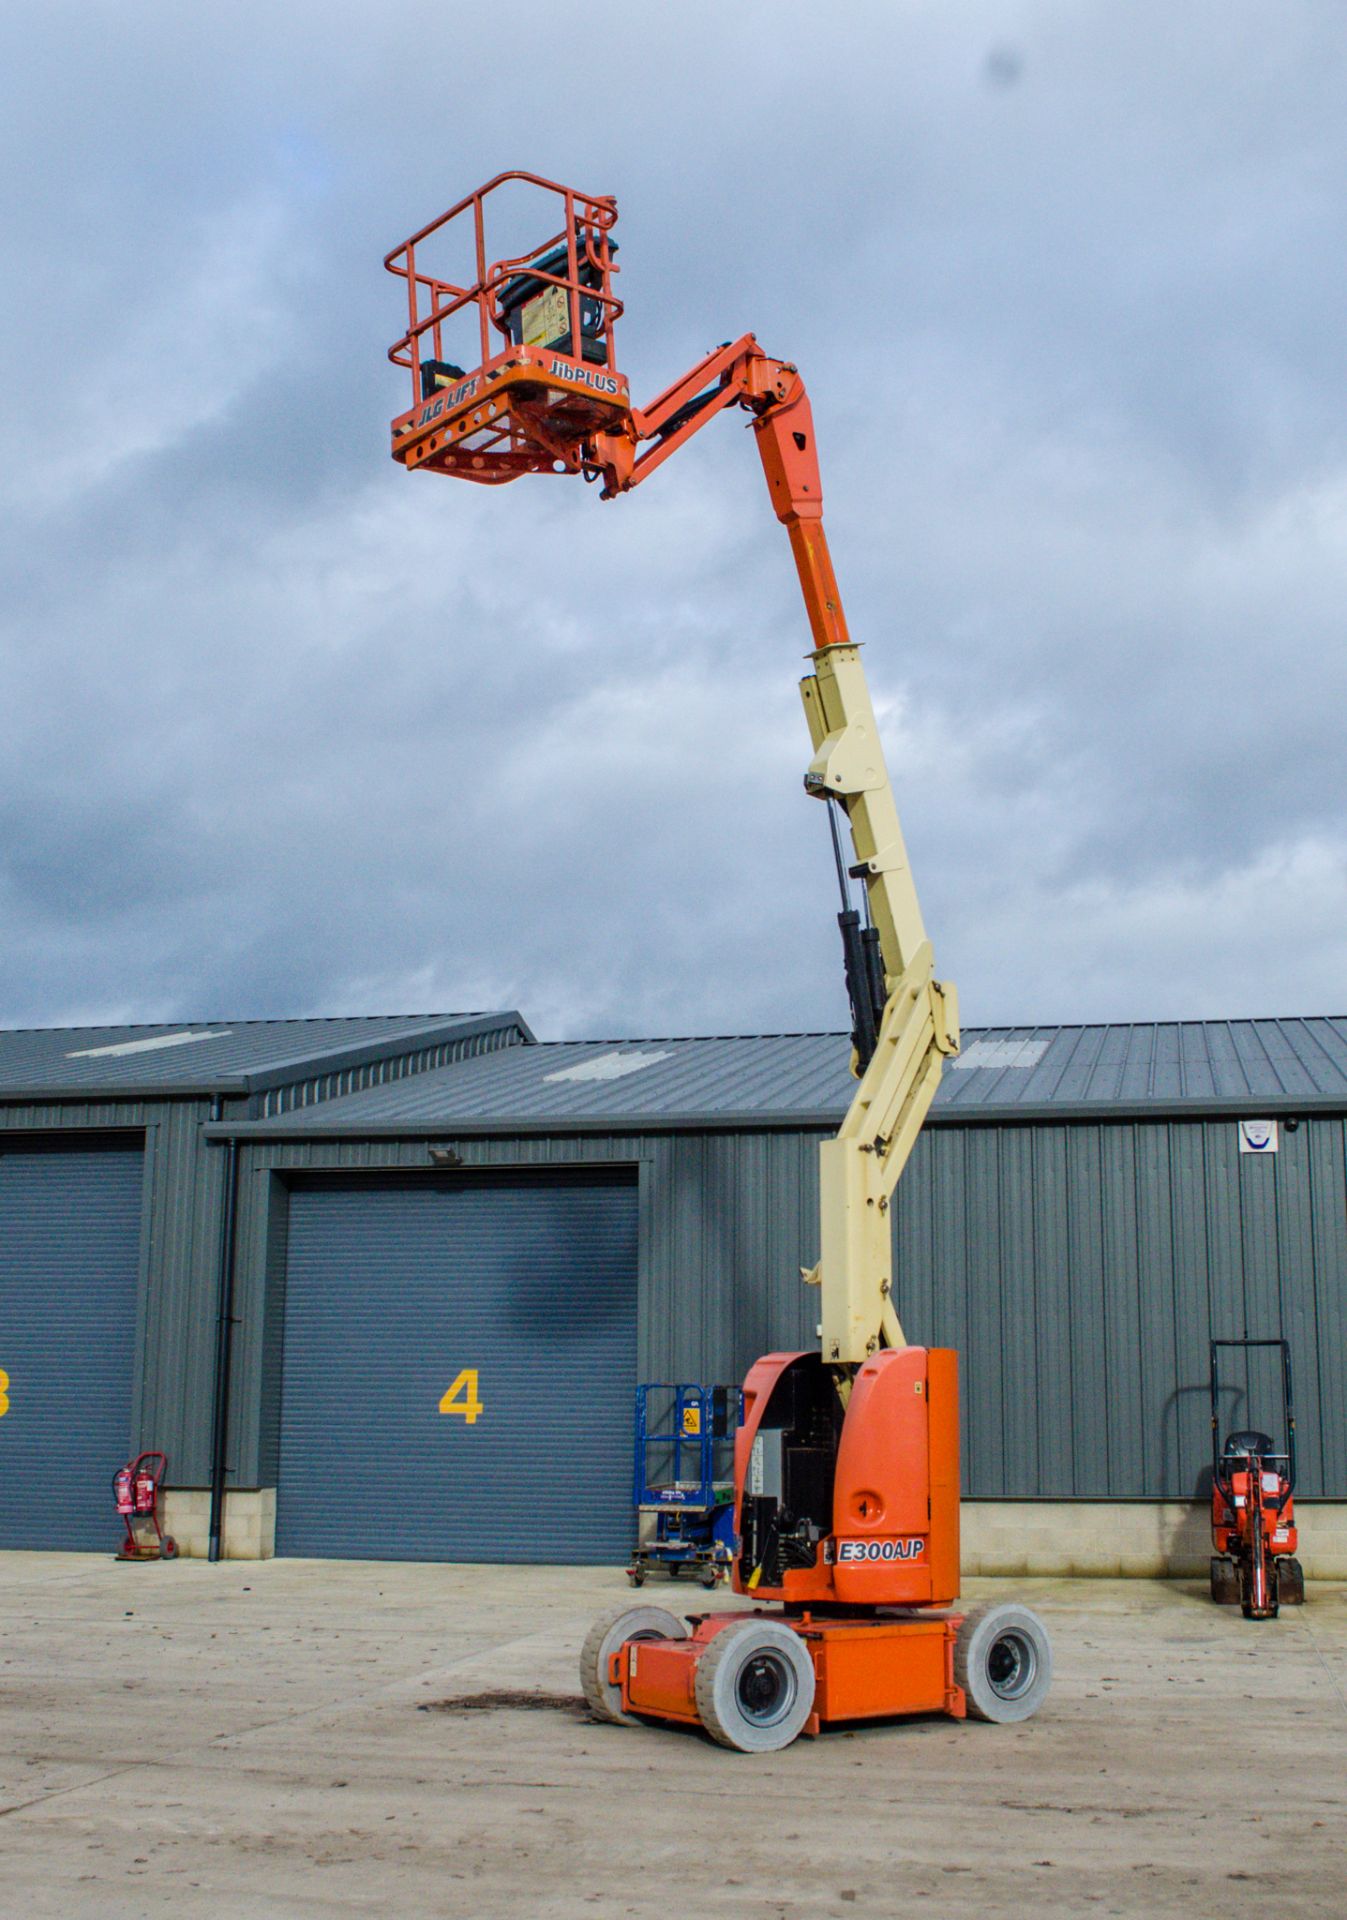 JLG 300AJP battery operated 30ft articulated boom lift Year: 2001 S/N: 0065700 Recorded hours: 663 - Image 11 of 16